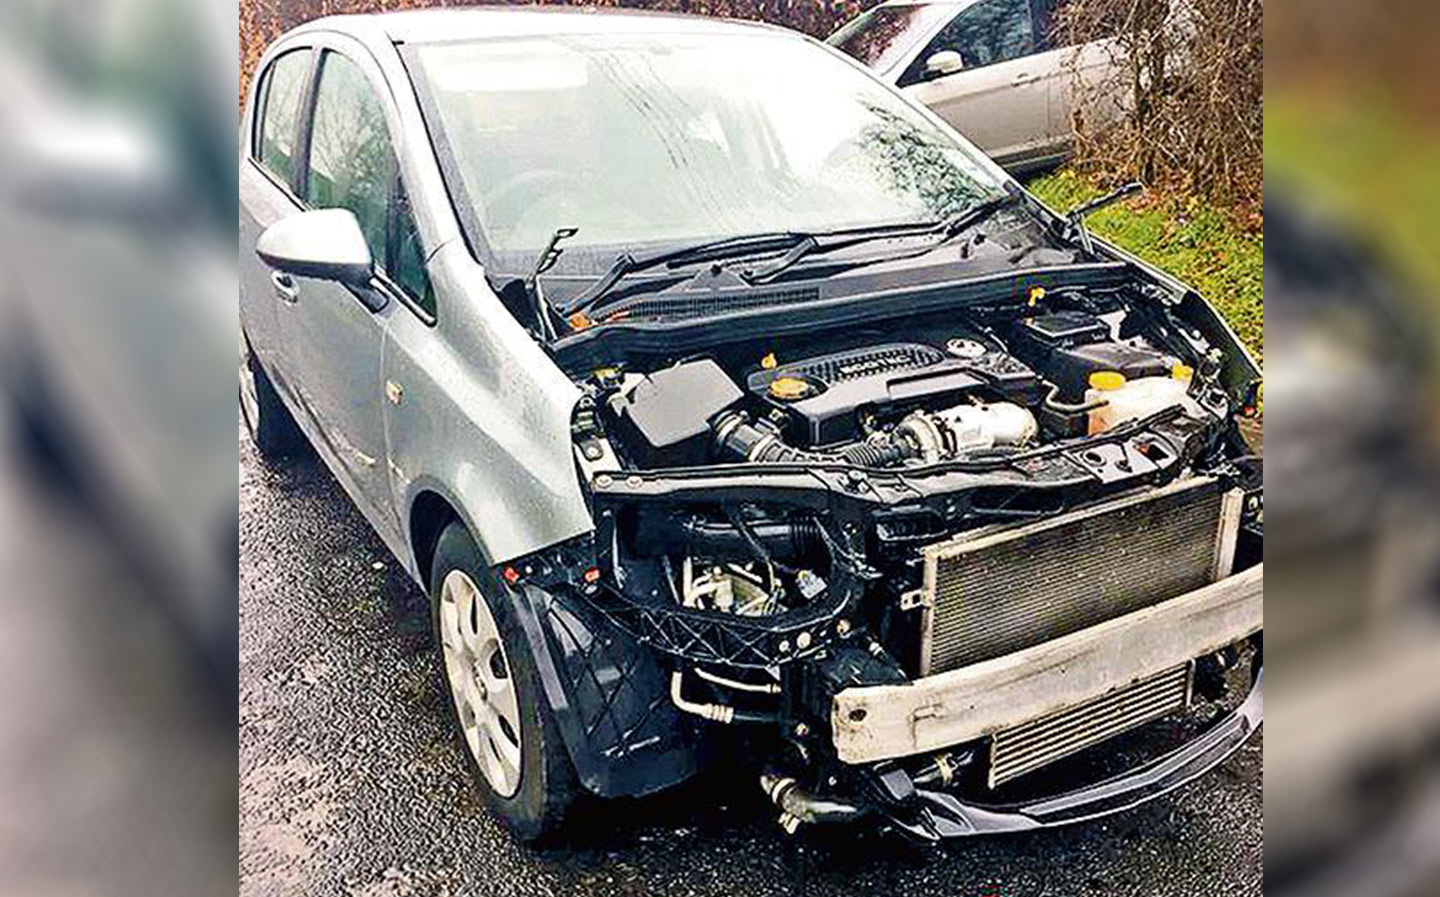 'Corsa Cannibals': Vauxhall hatchbacks are being stripped of bodywork by vandals